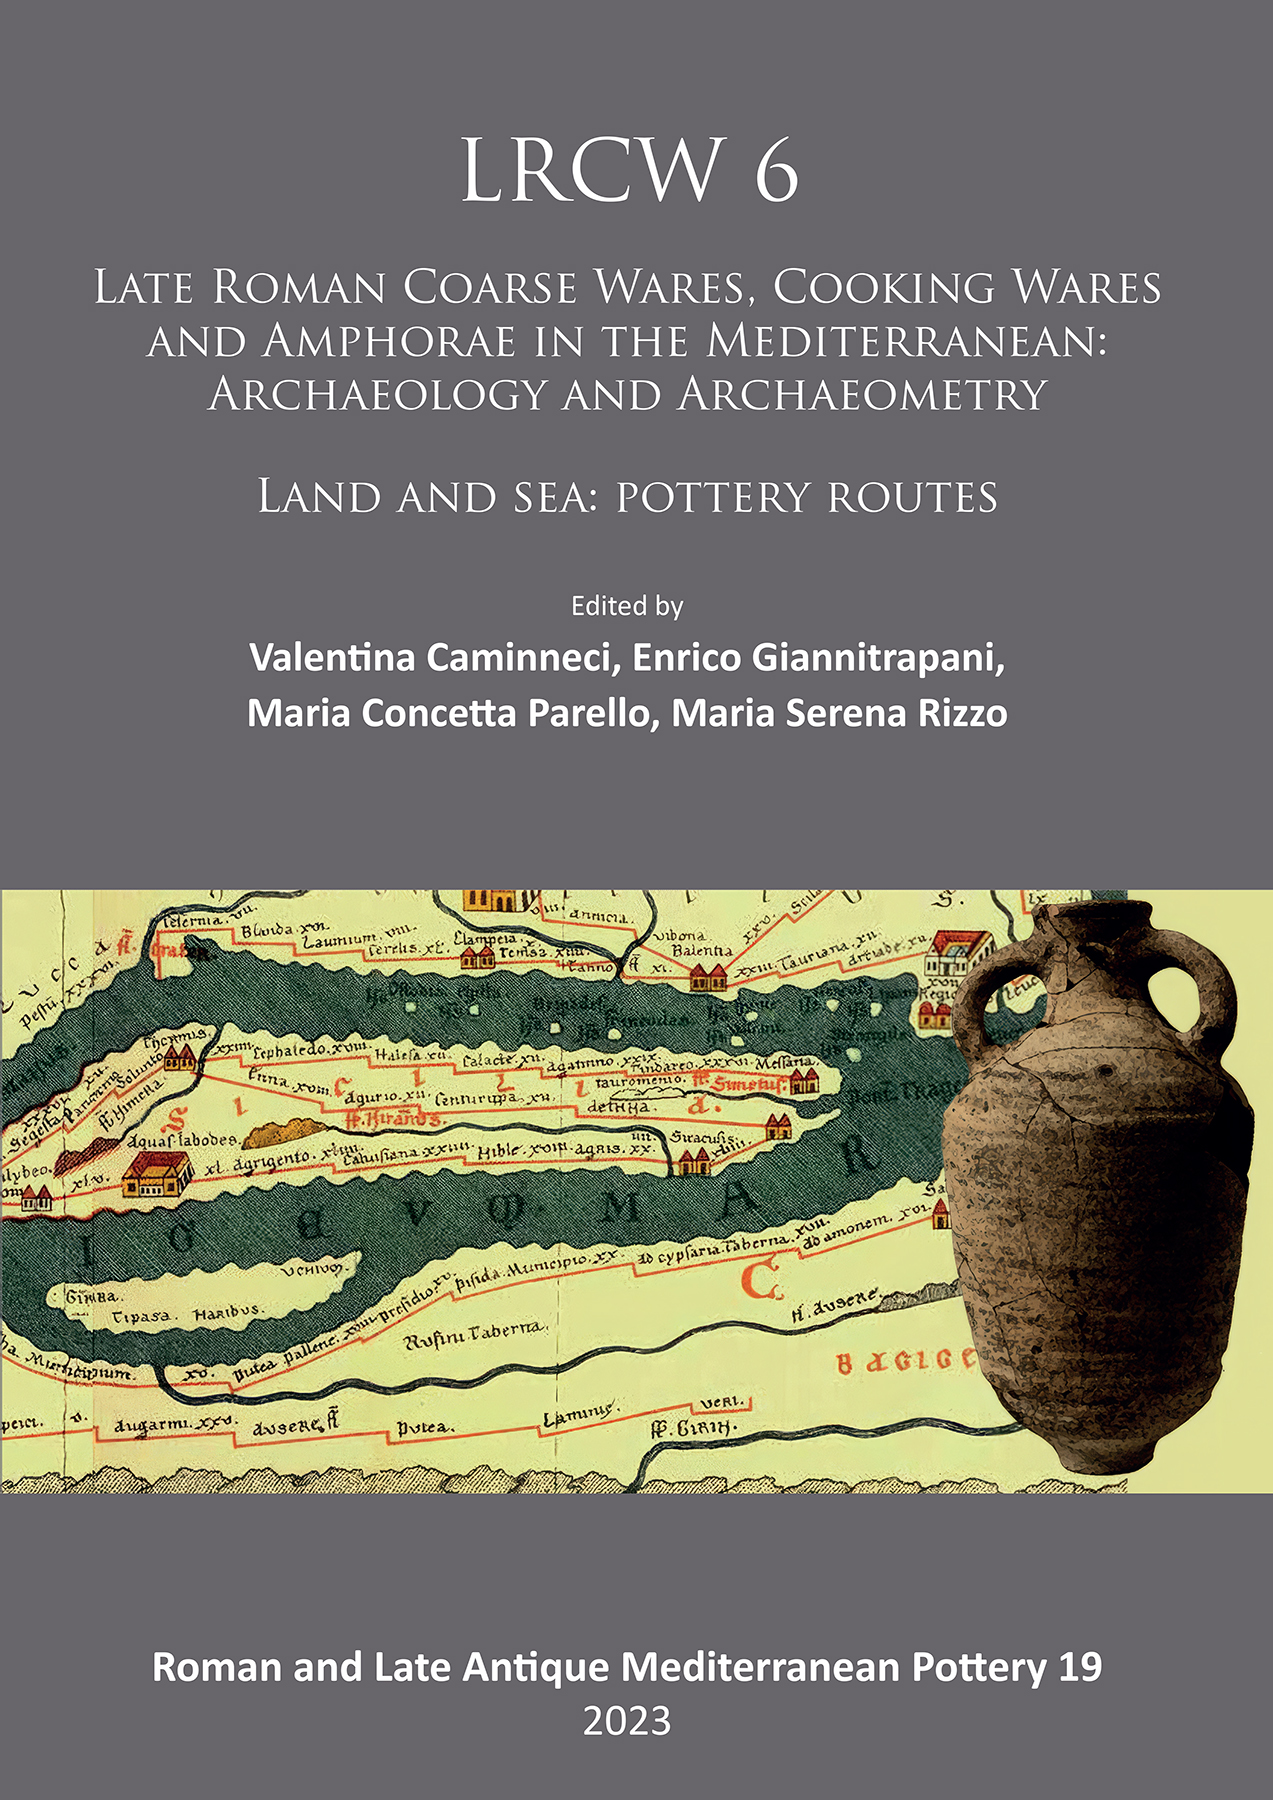 LRCW 6. Late Roman Coarse Wares, Cooking Wares and Amphorae in the Mediterranean: Archaeology and Archaeometry. Land and Sea: Pottery Routes, 2023. 2 volumes